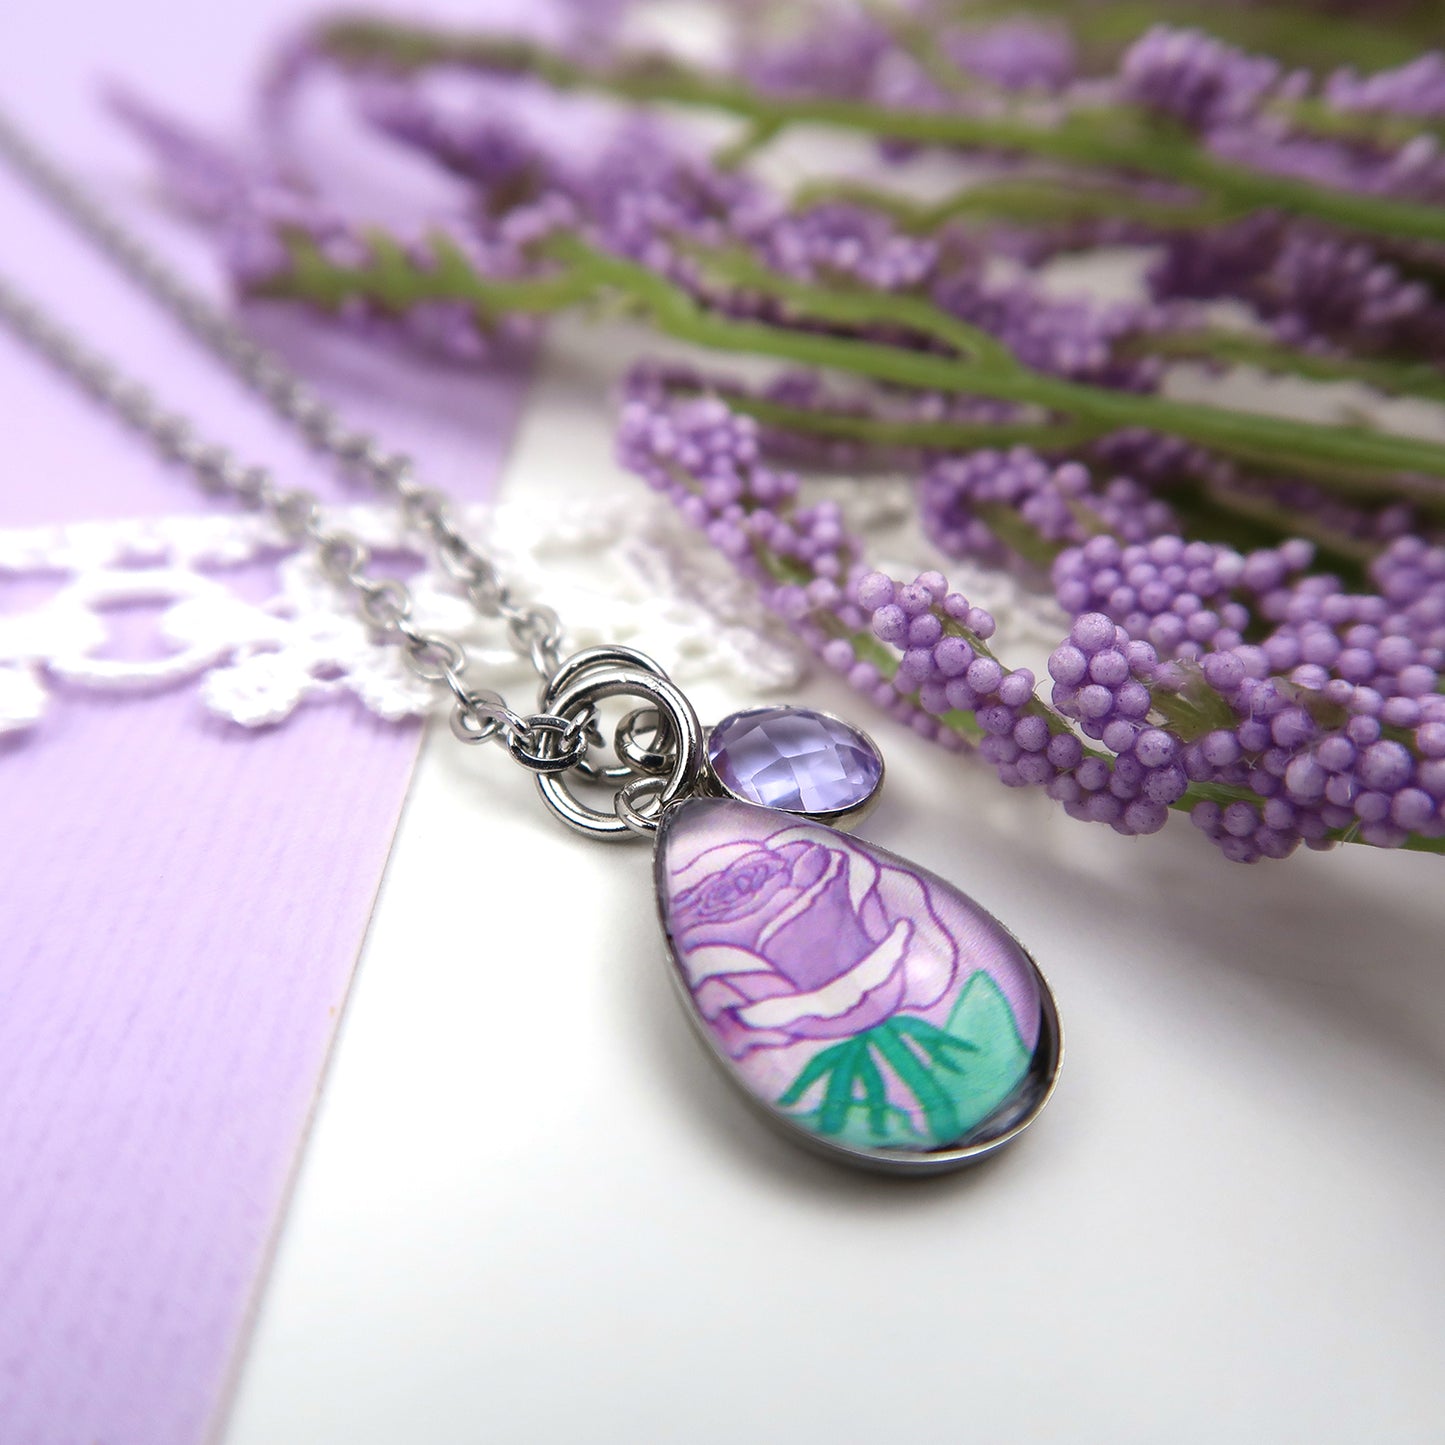 June Birth Flower Necklace - Roses